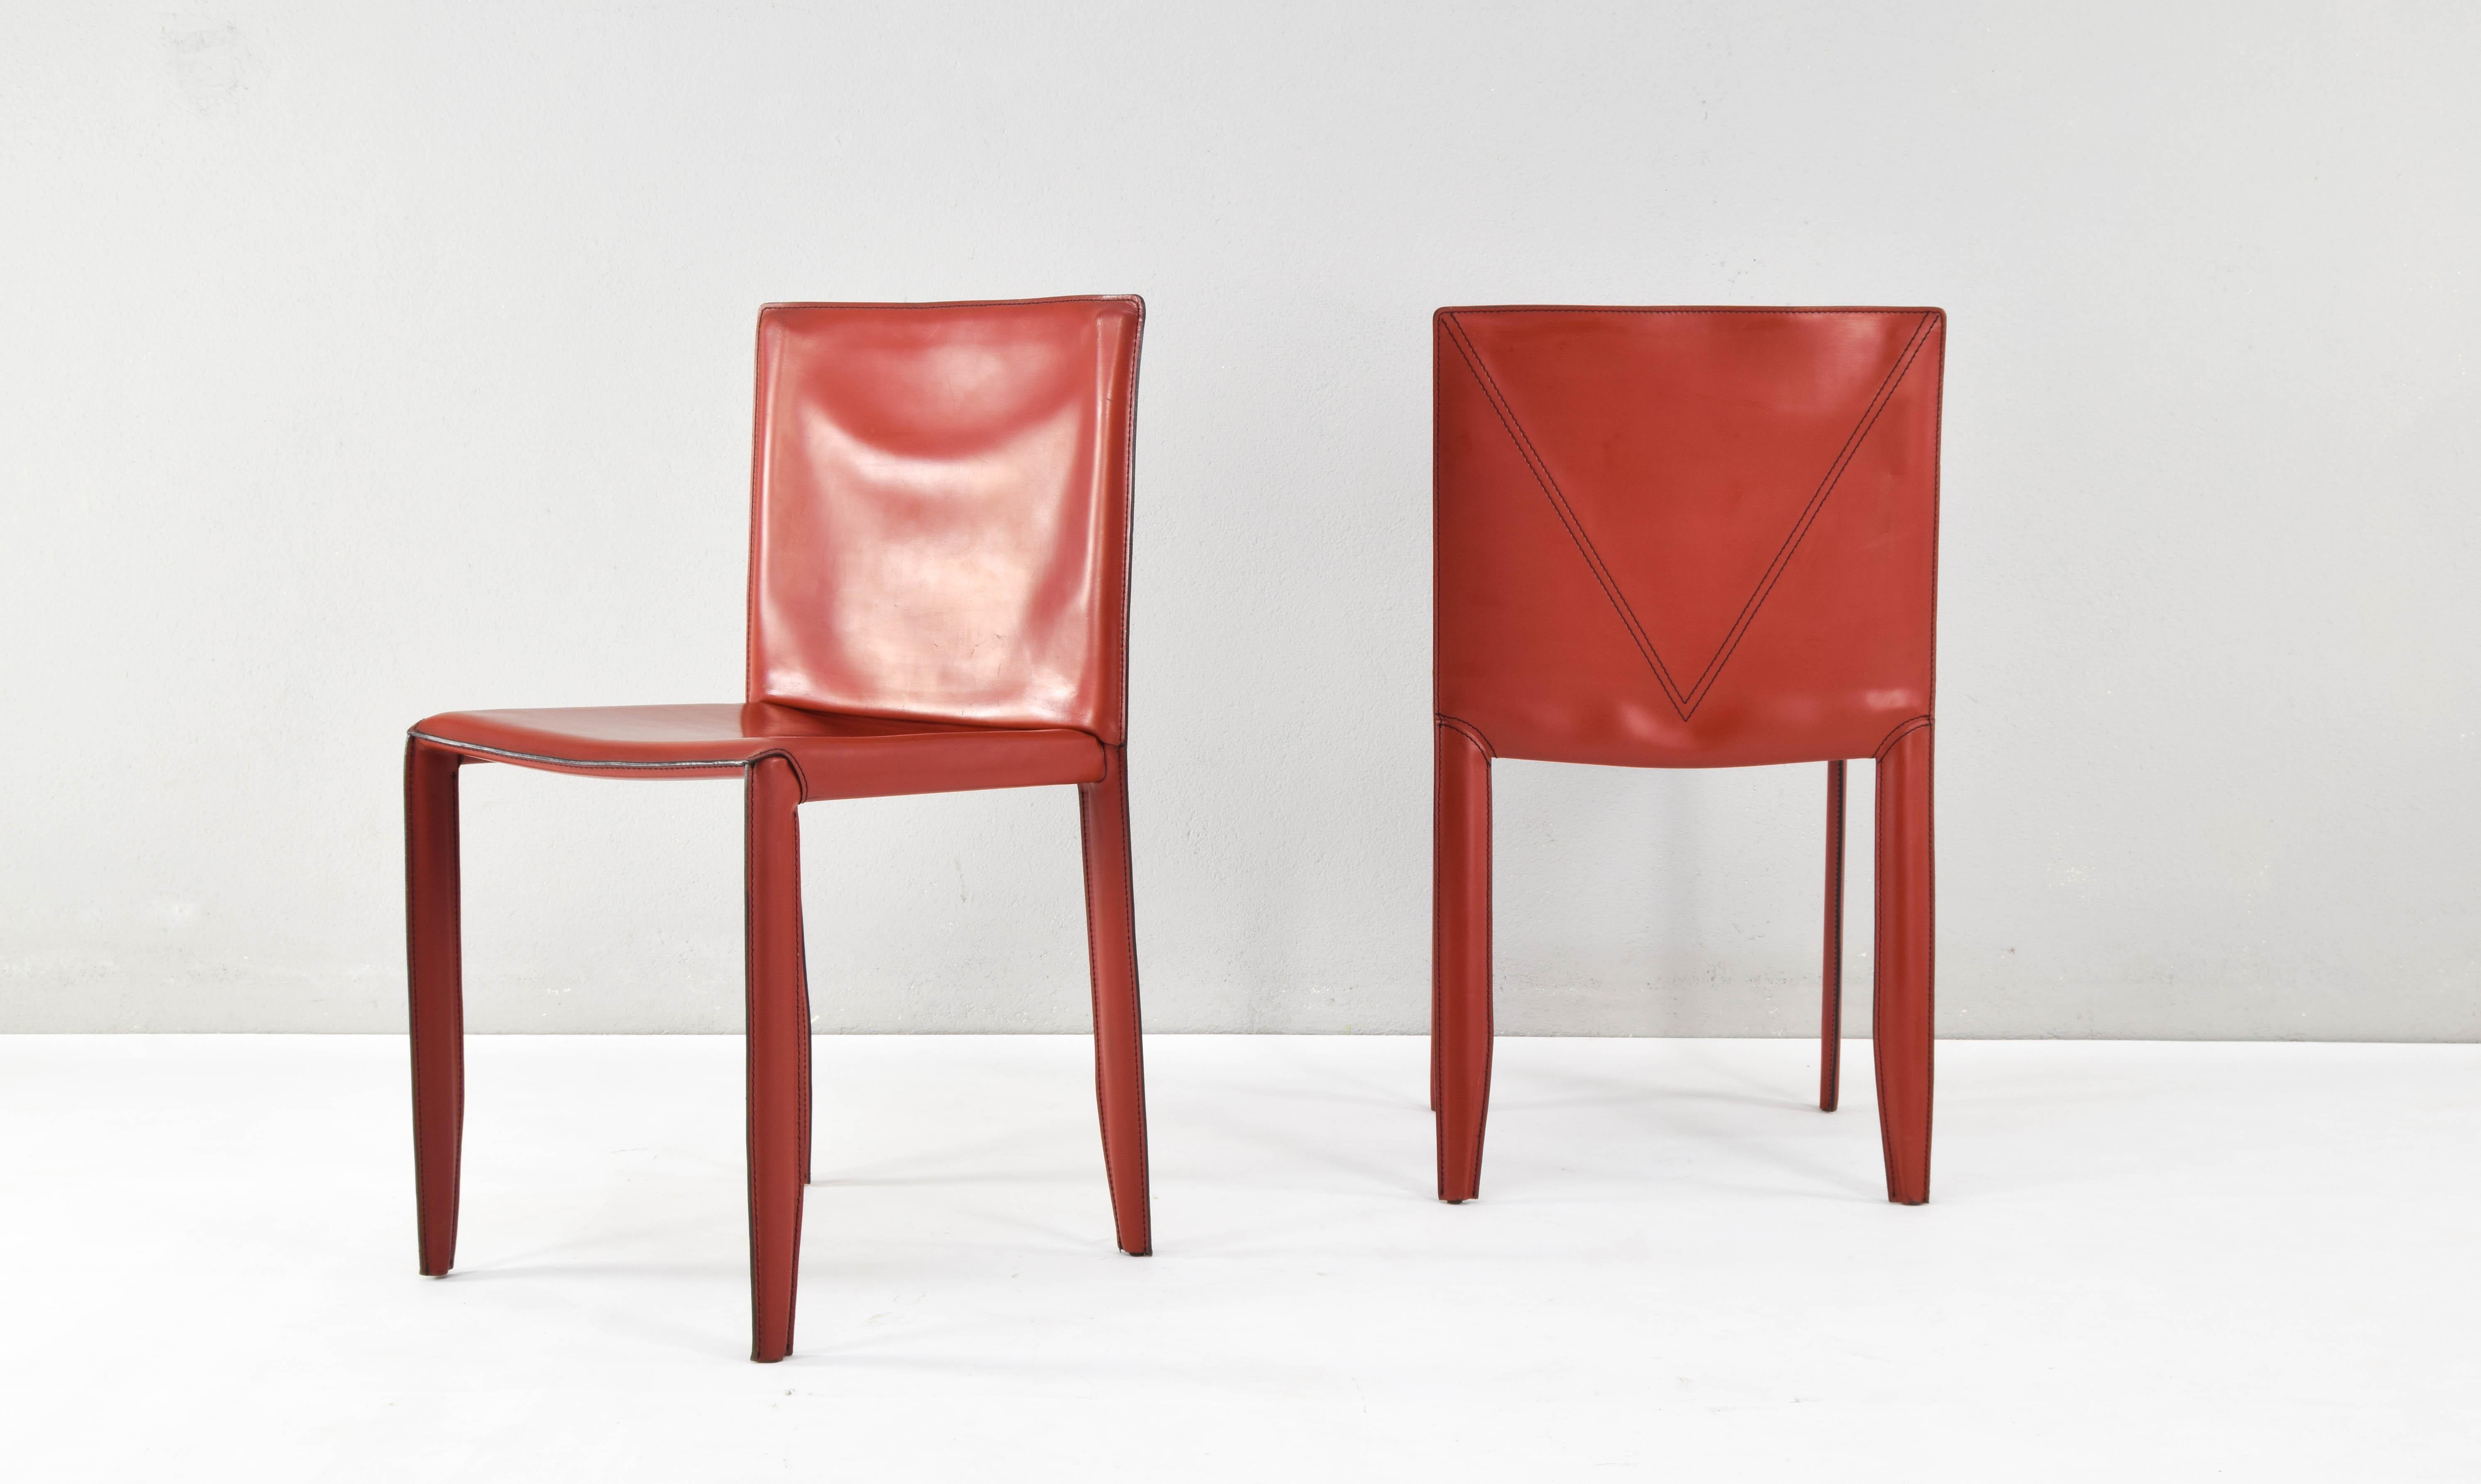 Piuma Italian Modern Leather Chairs Set of Two by Studio Kronos for Cattelan 90s 3